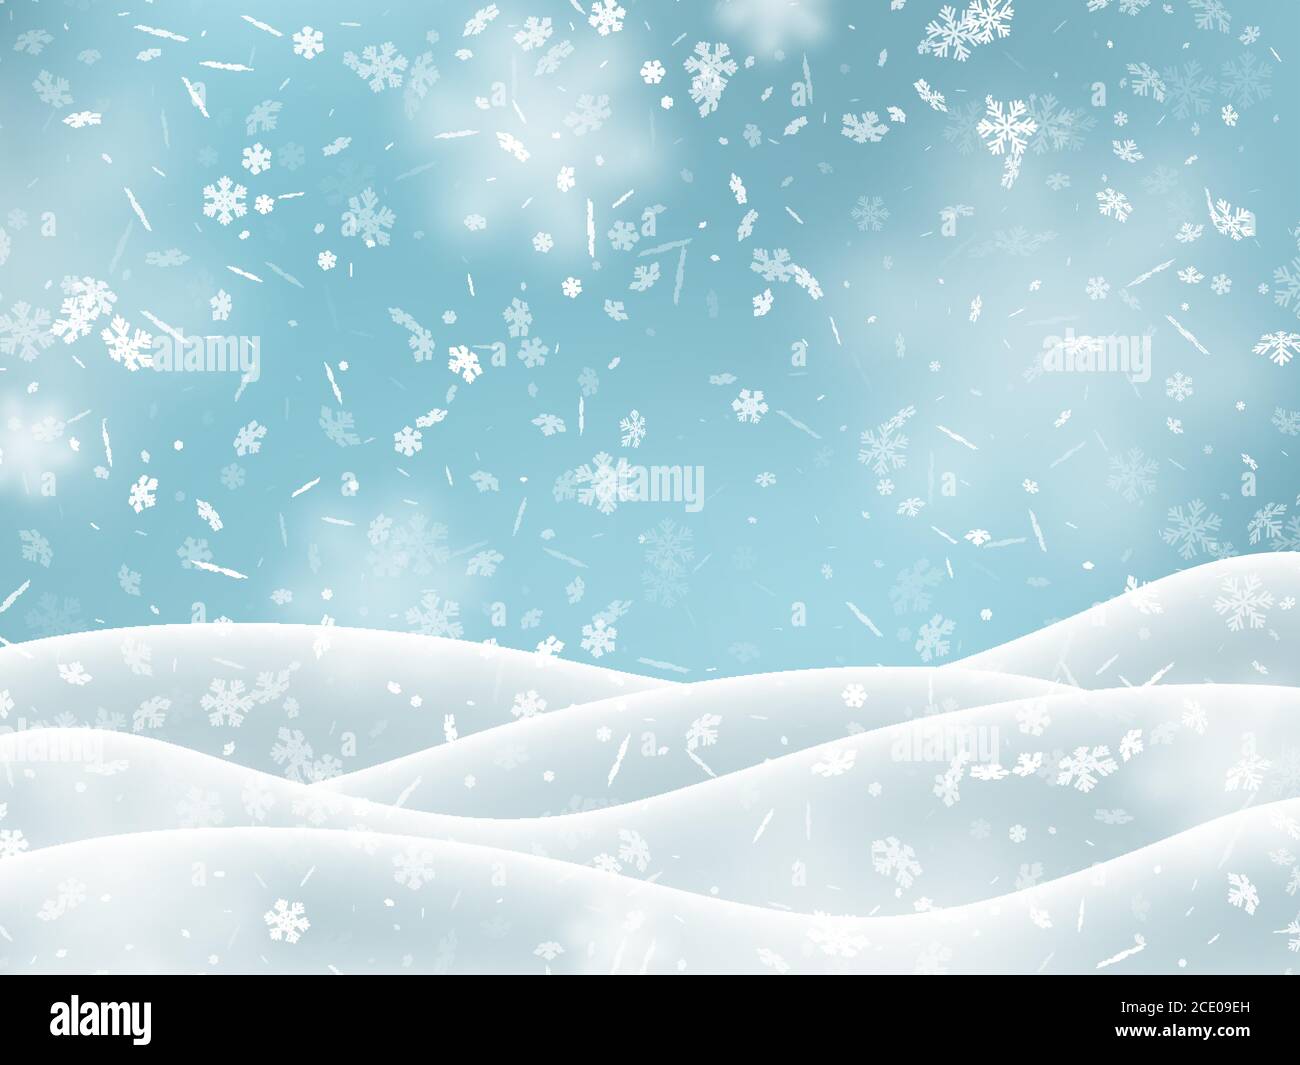 Falling snowflakes with snowdrifts. Stock Vector